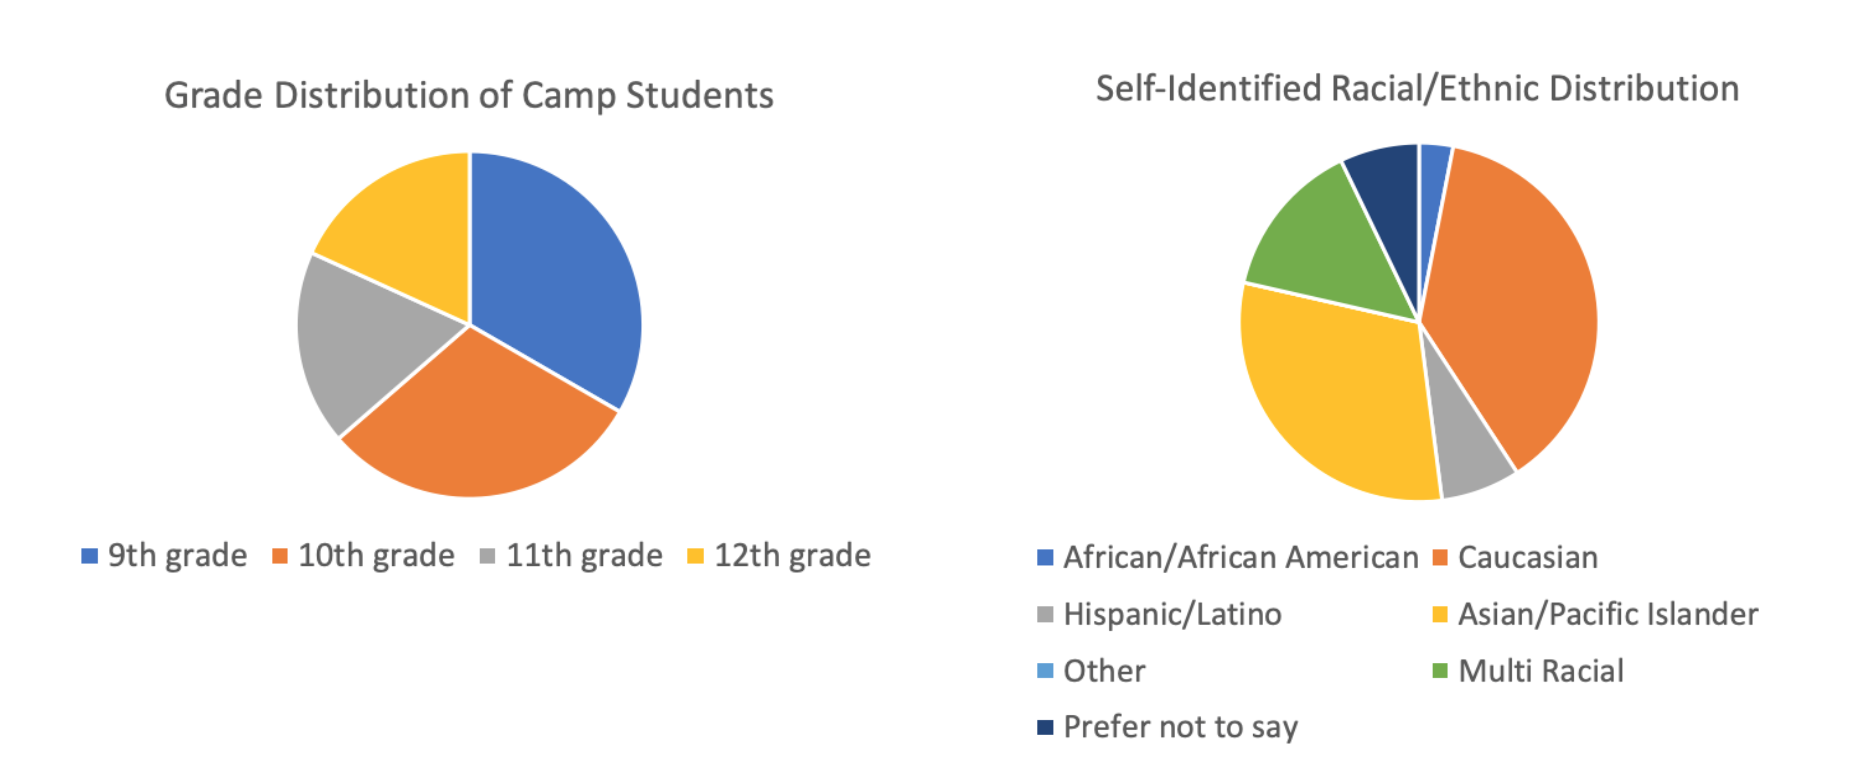 Grade distribution of campers: 9th grade 33% 10th grade 30% 11th grade 18% 12th grade 18%. Ethnic Distribution: African/African American 3% Caucasian 37% Hispanic/Latino 7% Asian/Pacific Islander 30% Other 0% Multi Racial 14% Prefer not to say 7%.